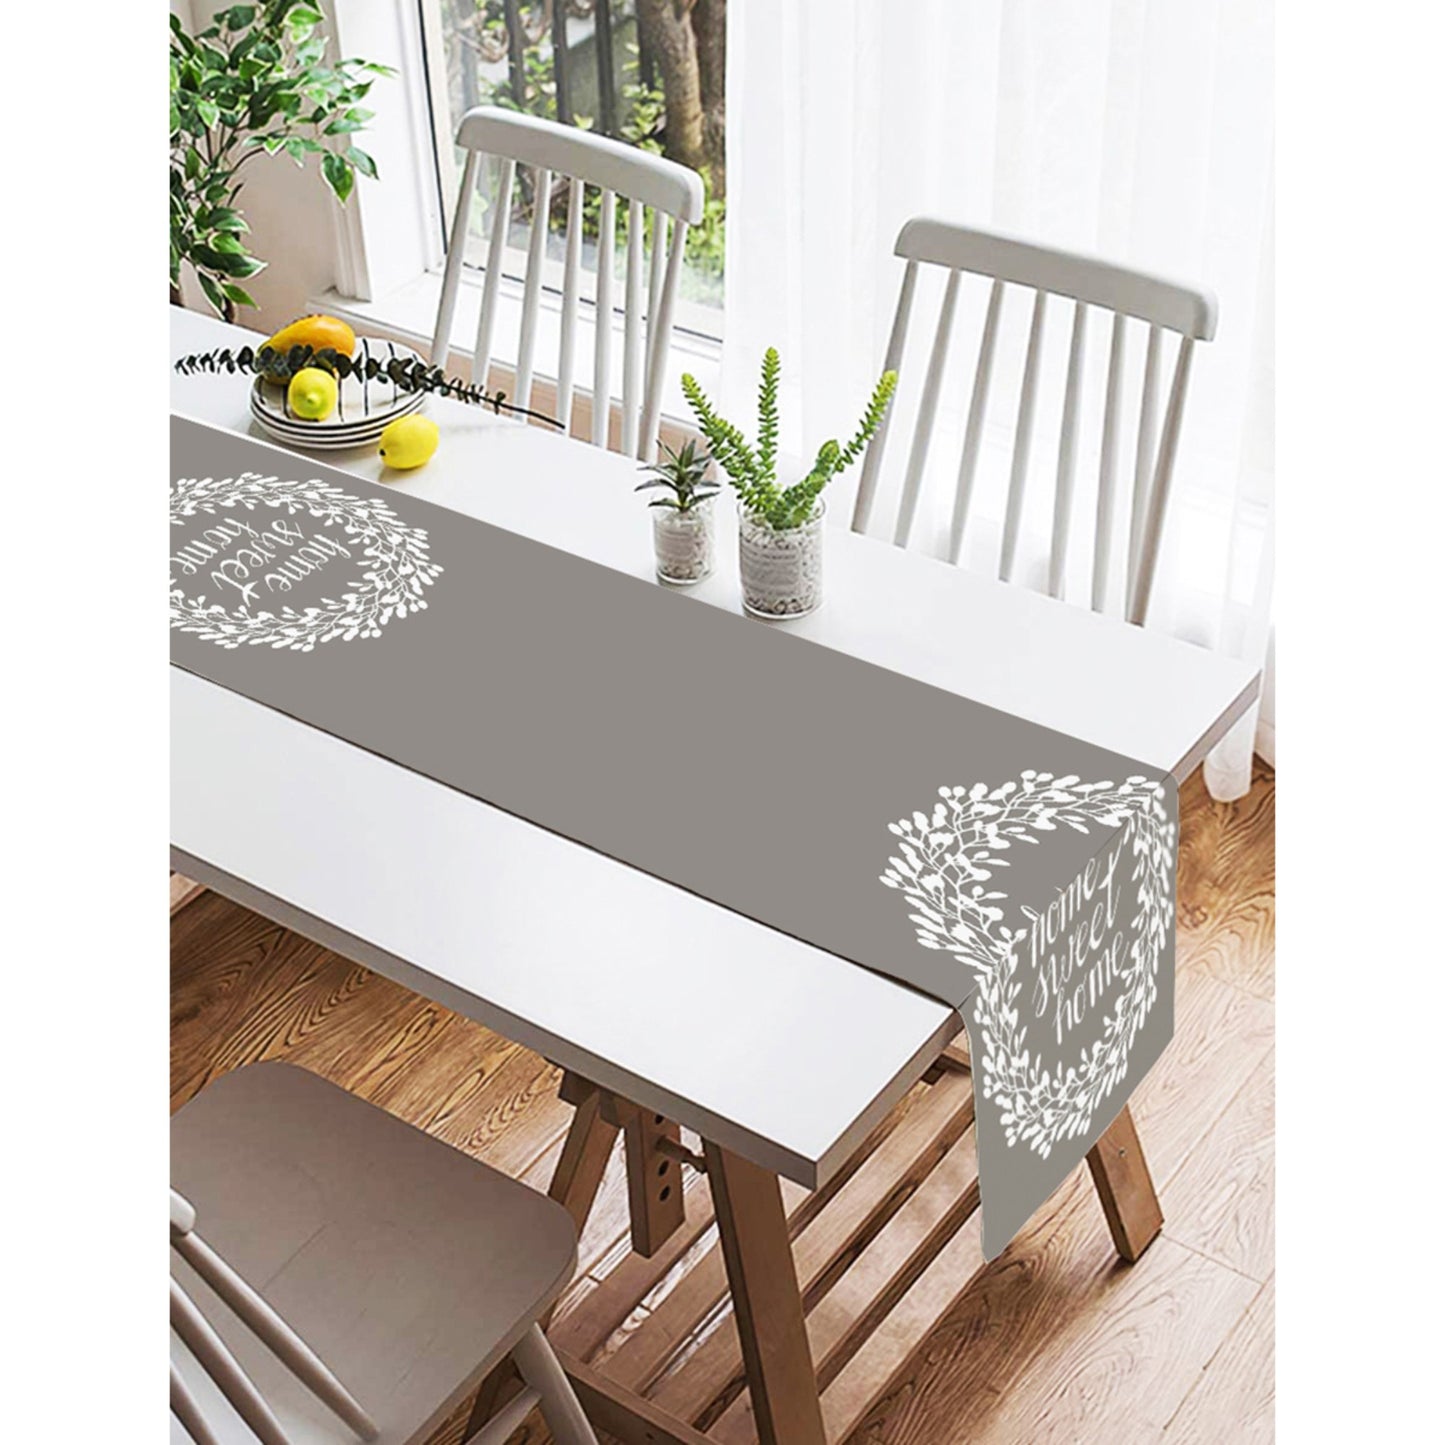 Minimalist grey table runner for sleek and modern tables.